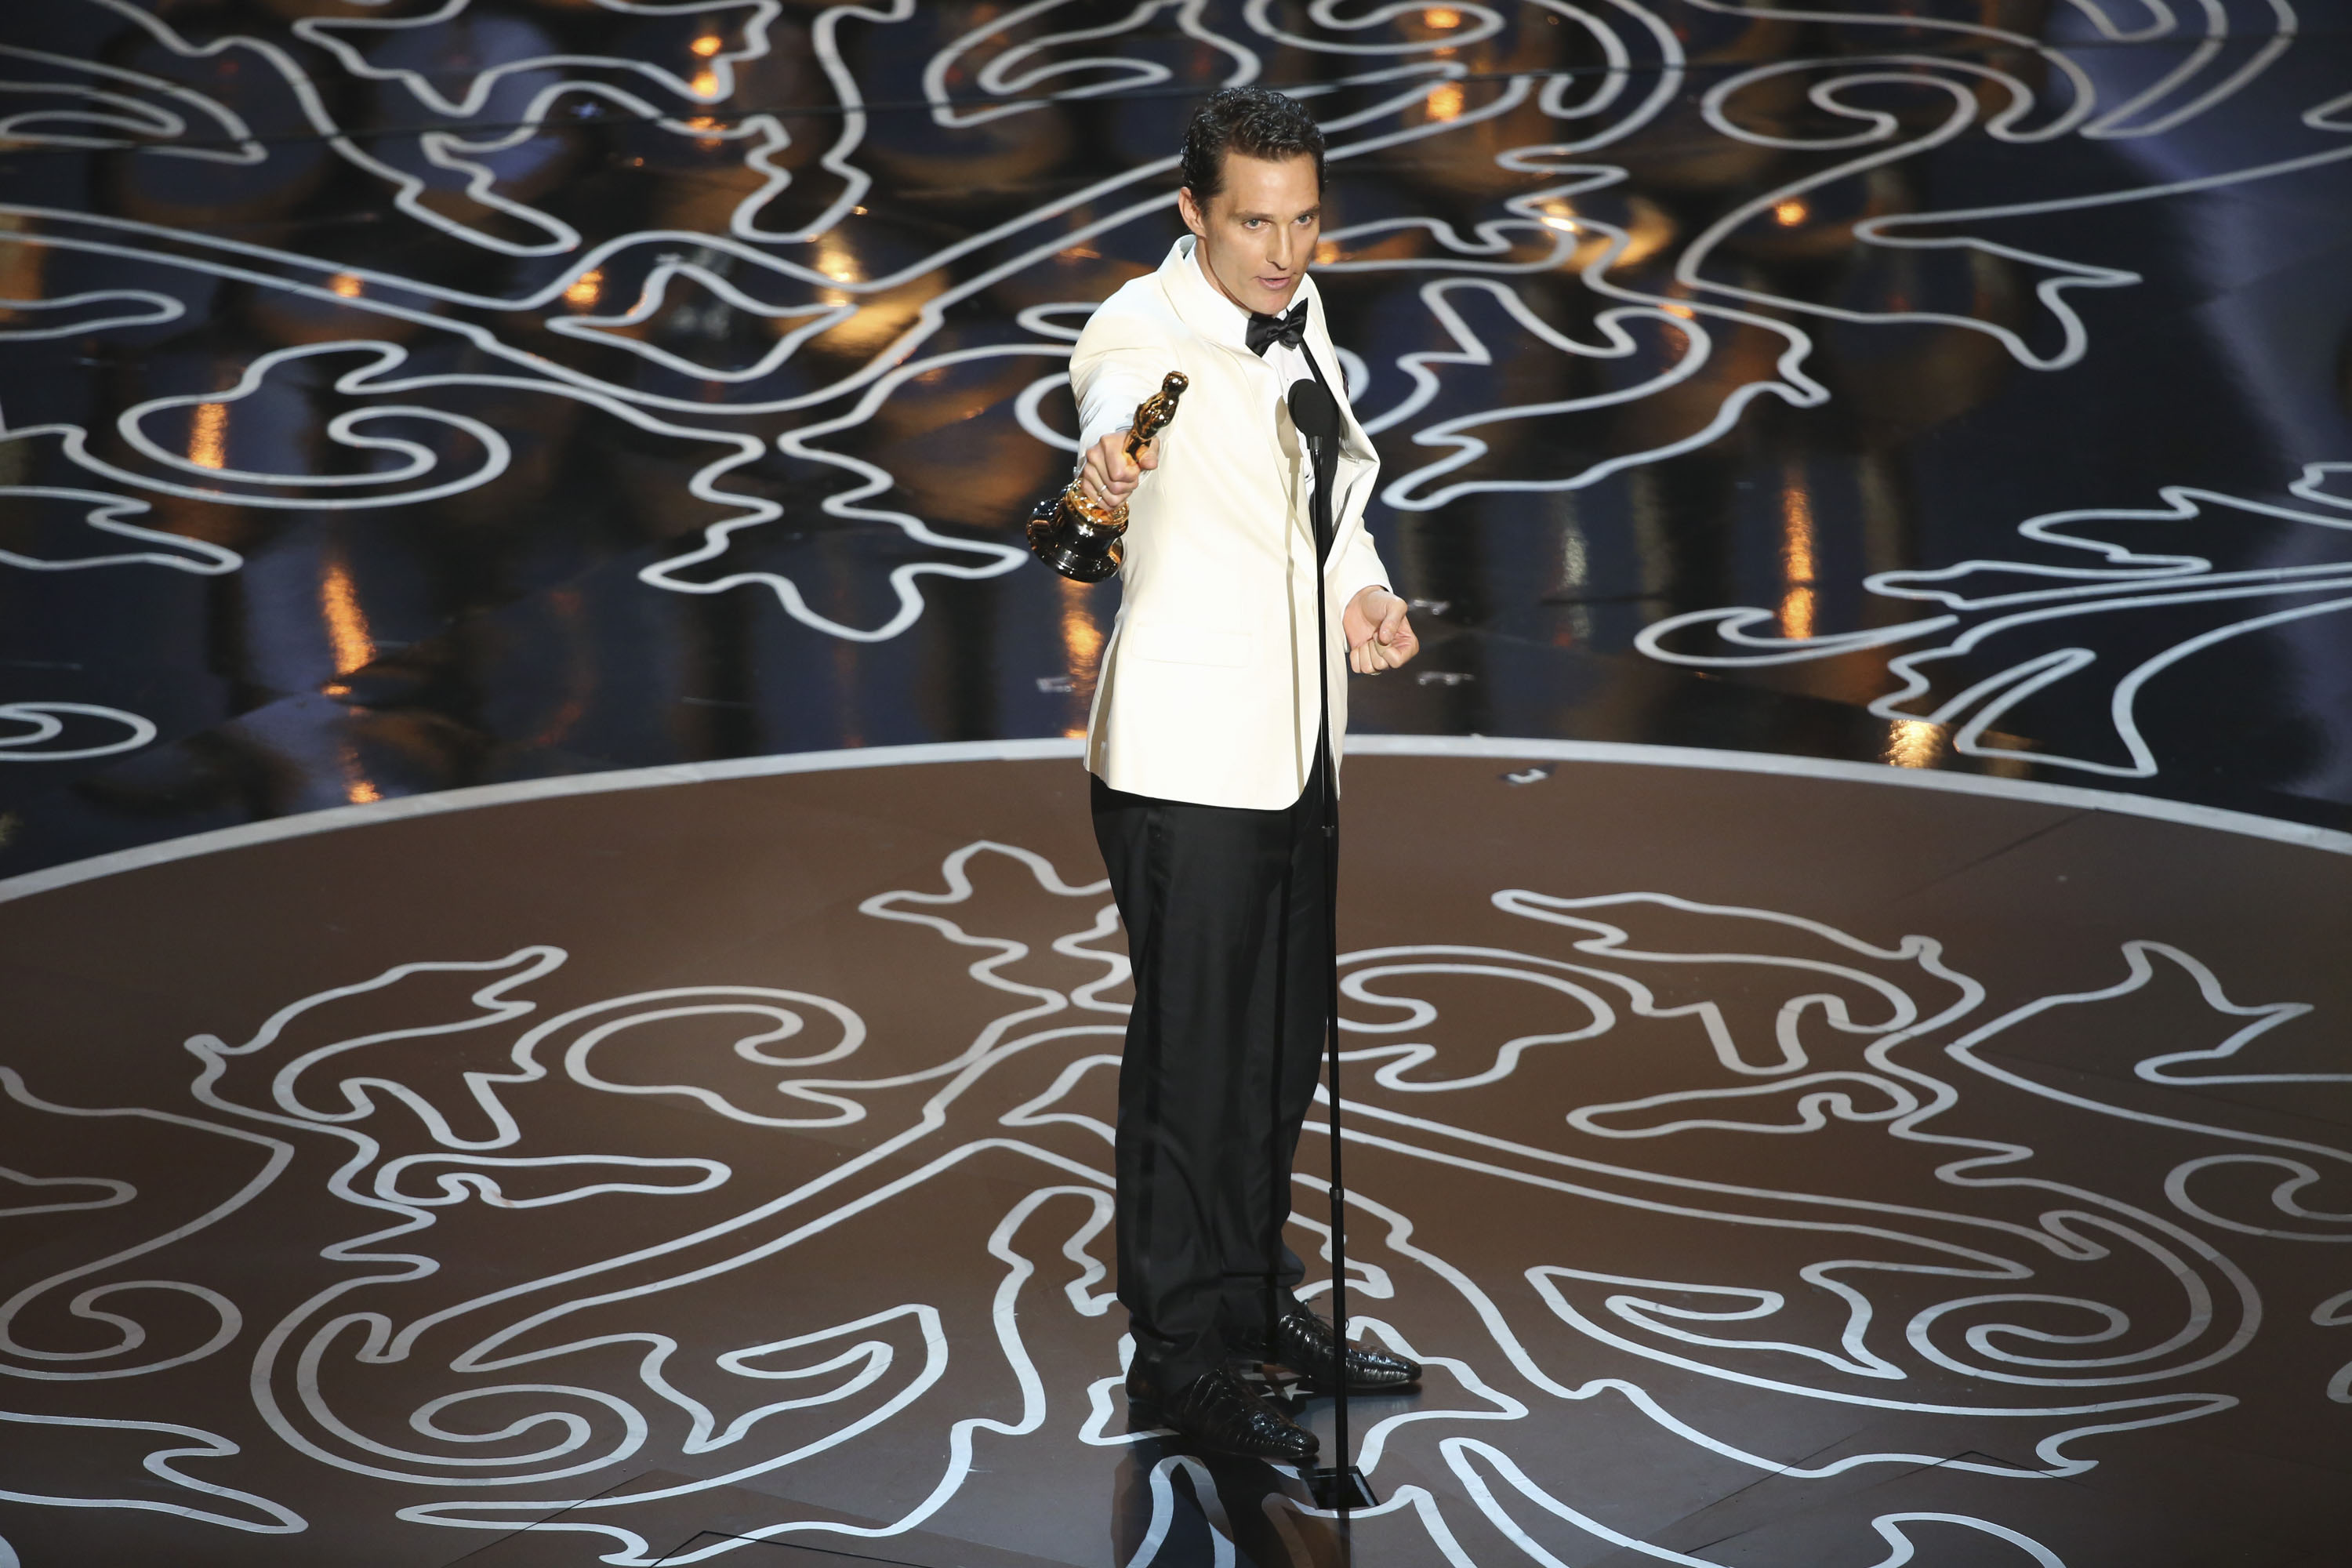 Matthew McConaughey accepts the Best Actor award at the 2014 Oscars (Adam Taylor&mdash;ABC via Getty Images)